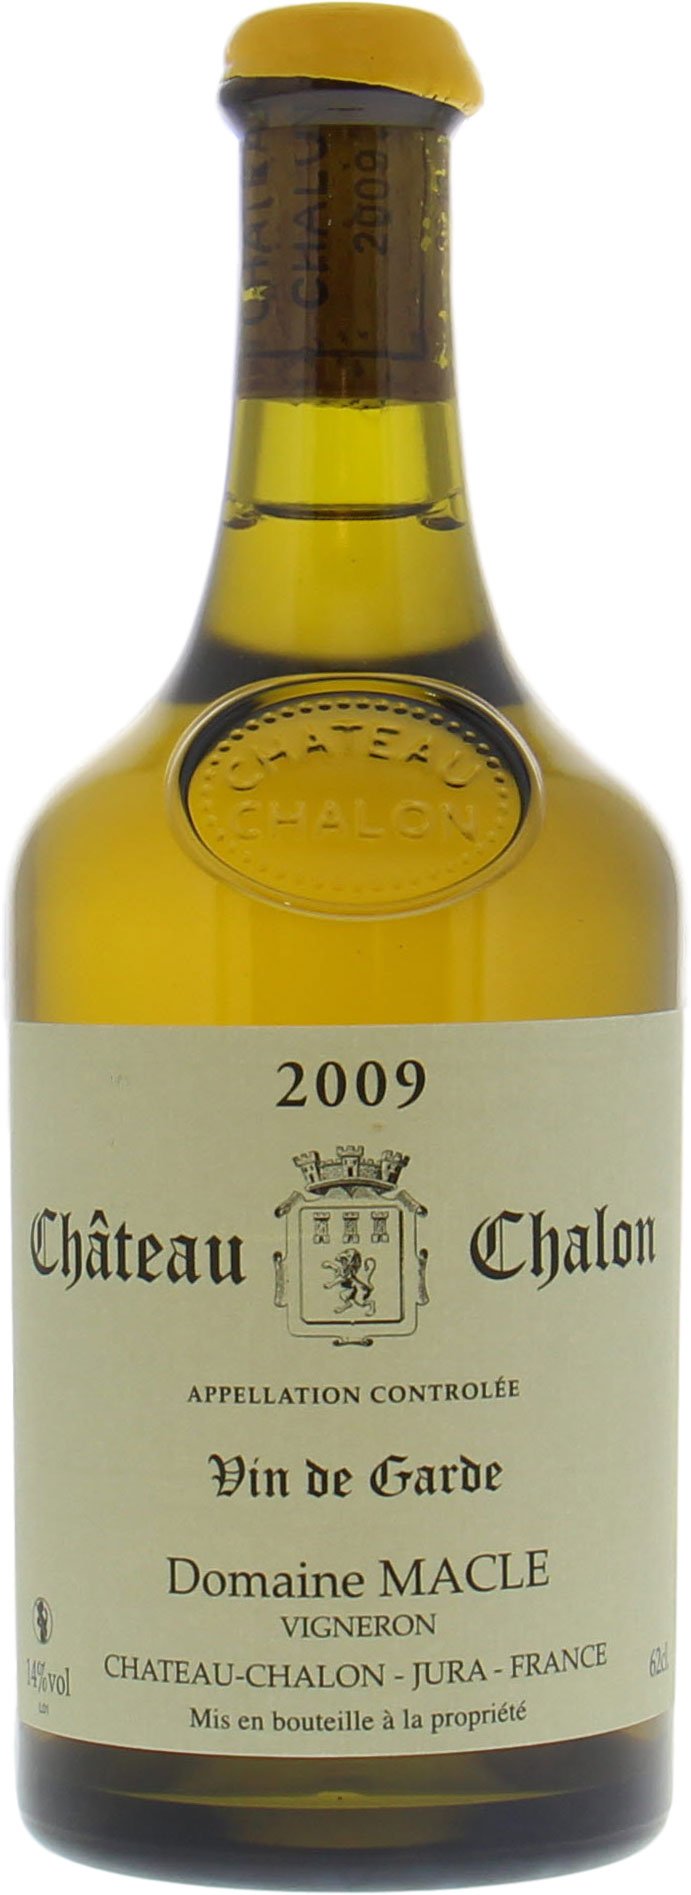 Domaine Macle - Château Chalon 2009 Perfect